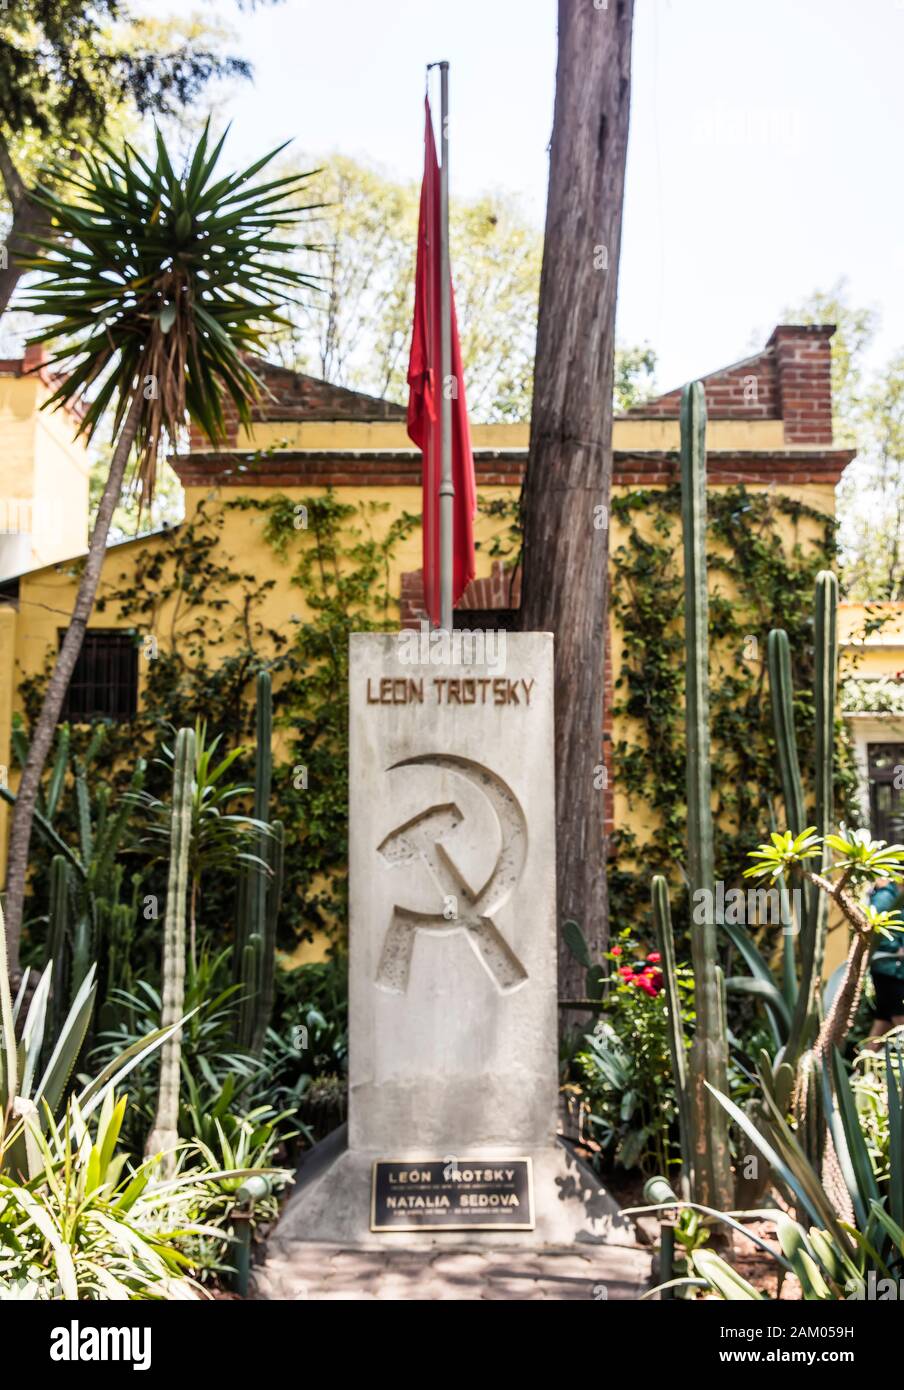 Trotsky Mexico city Grave of Leon Trotsky and his wife Natalia Sedova in his house in Coyoacan, Mexico City, Mexico Stock Photo